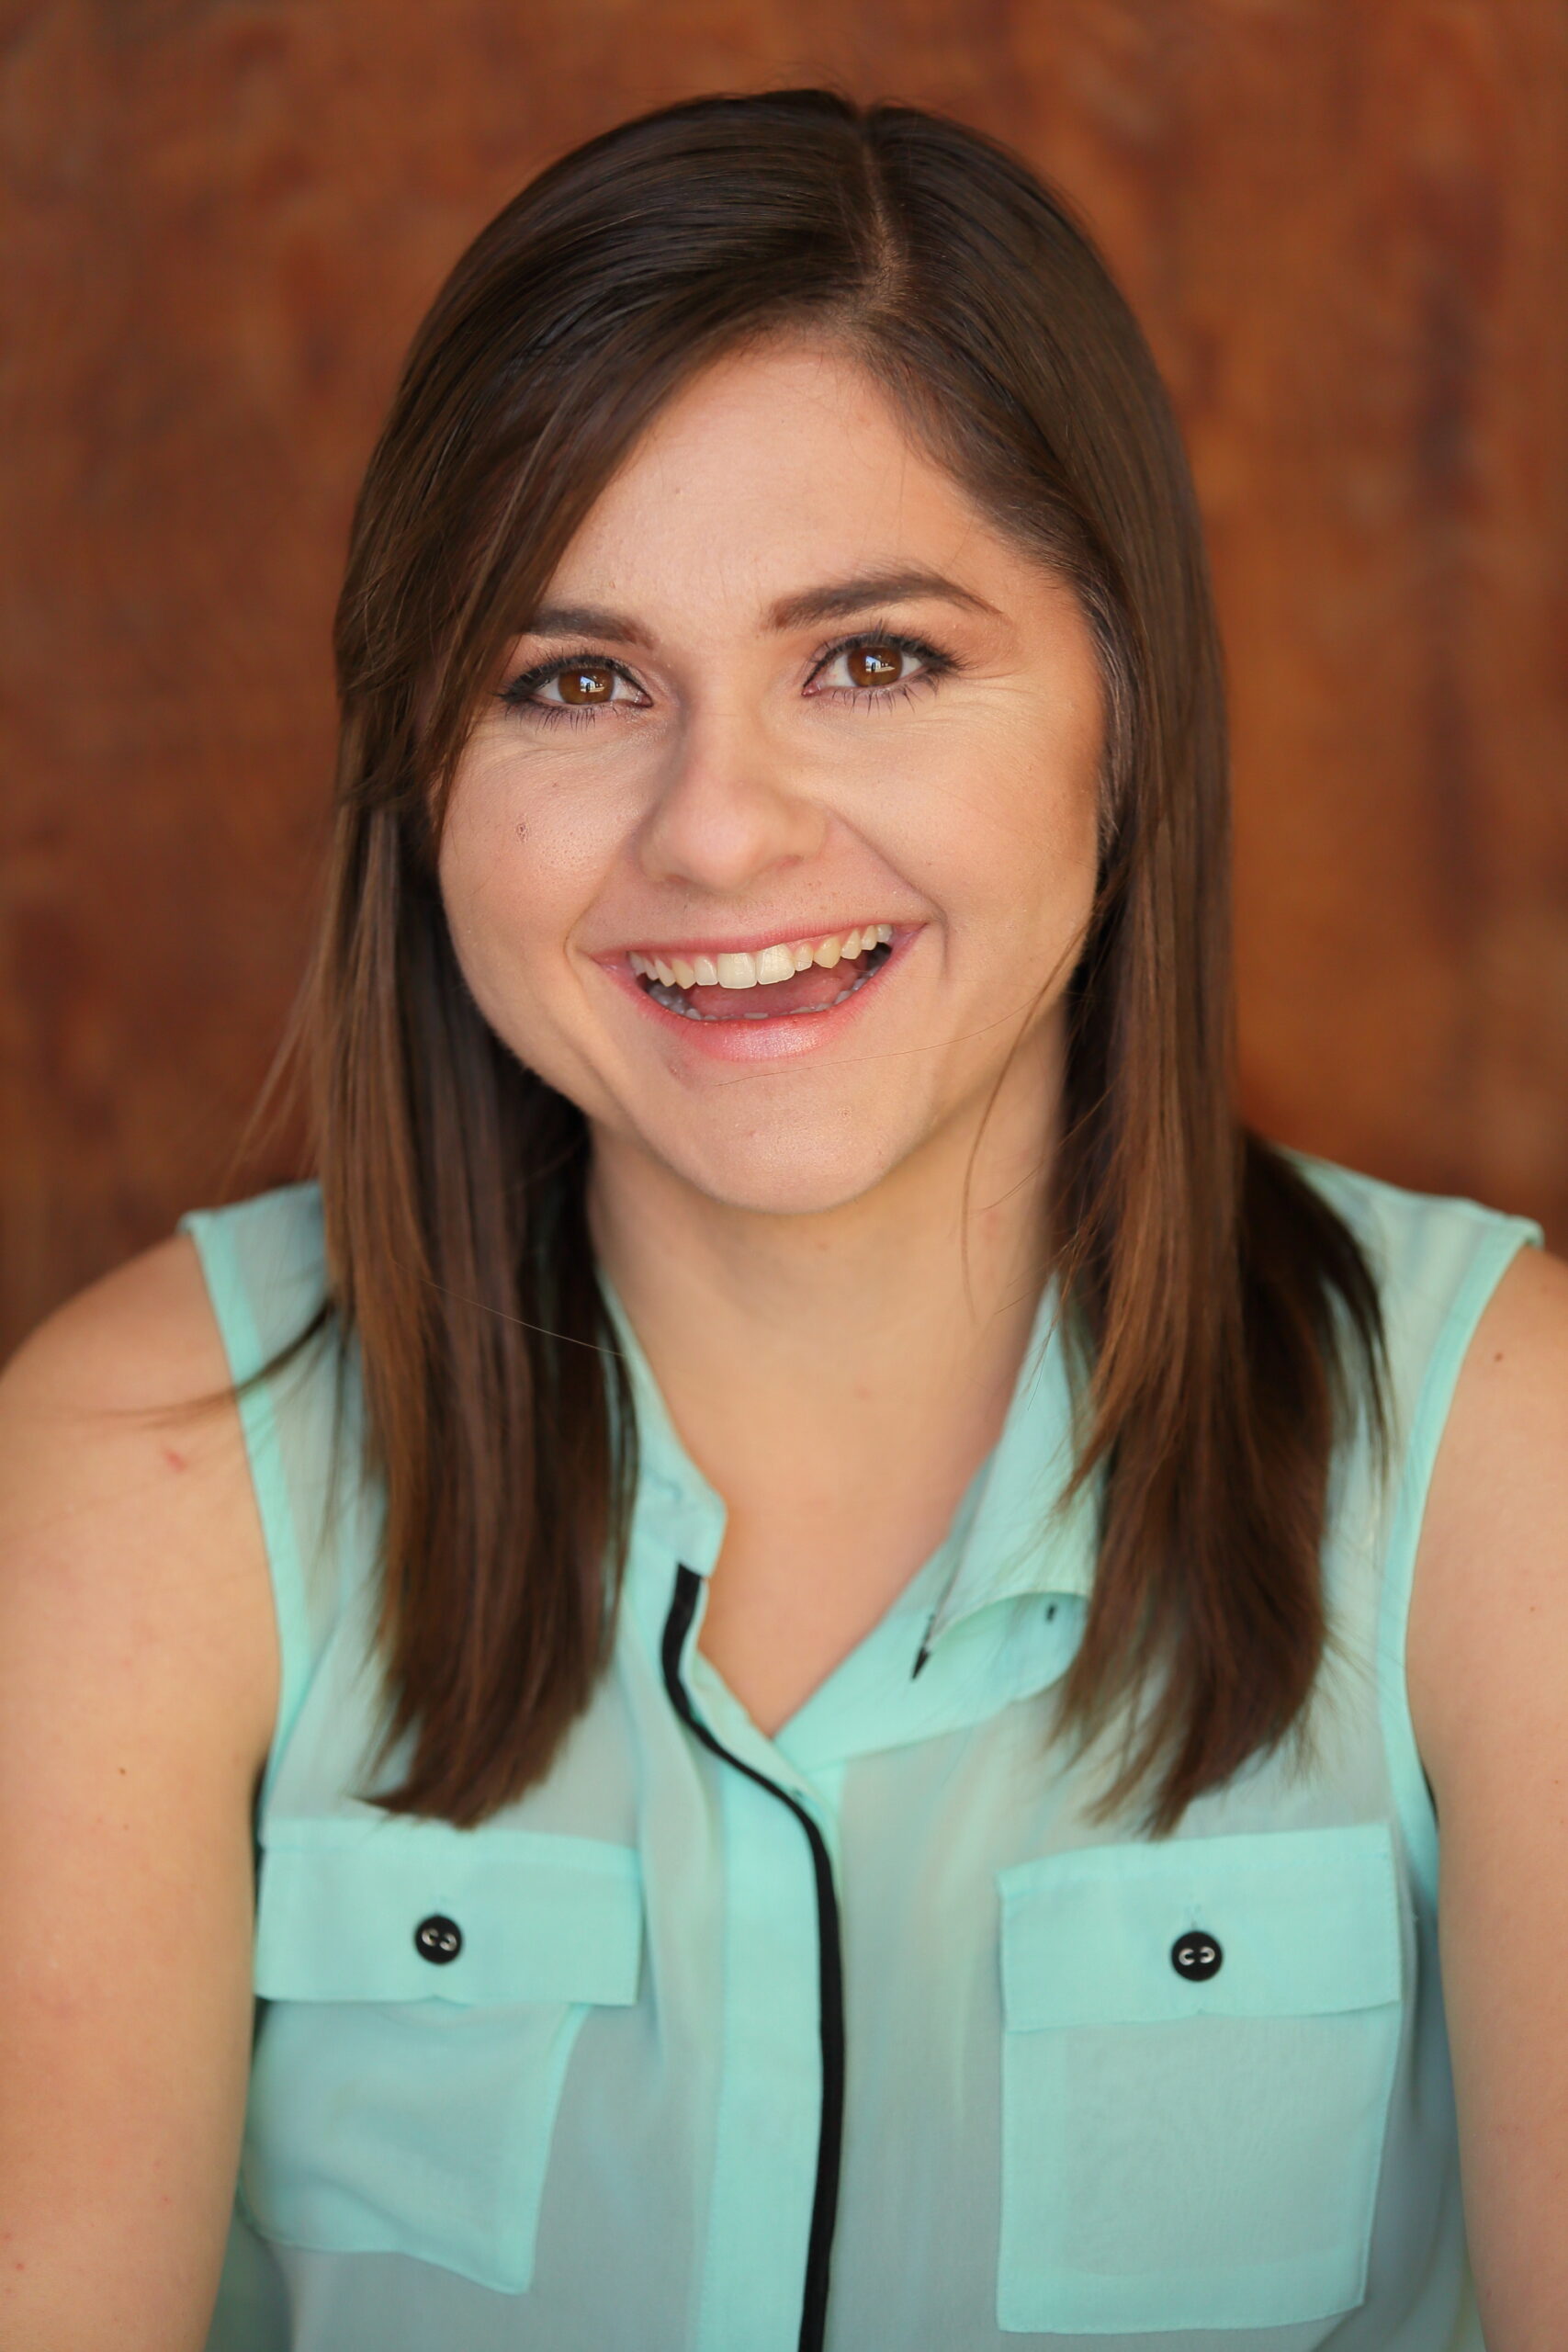 Melissa Marino smiling on a brown background with a mint green, sleeveless collar shirt